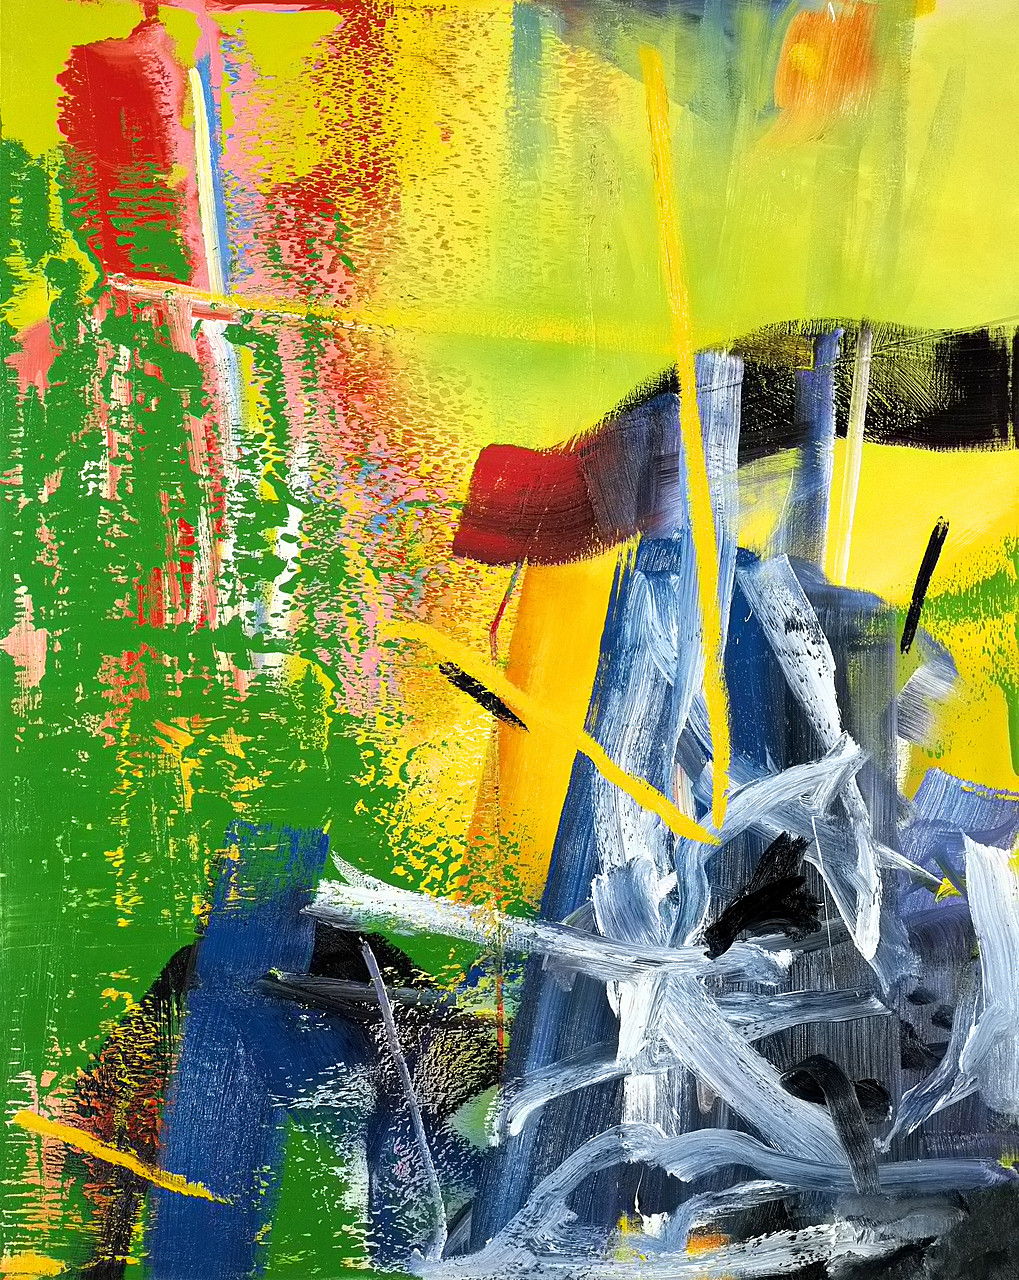 How Does Gerhard Richter Make His Abstract Paintings?